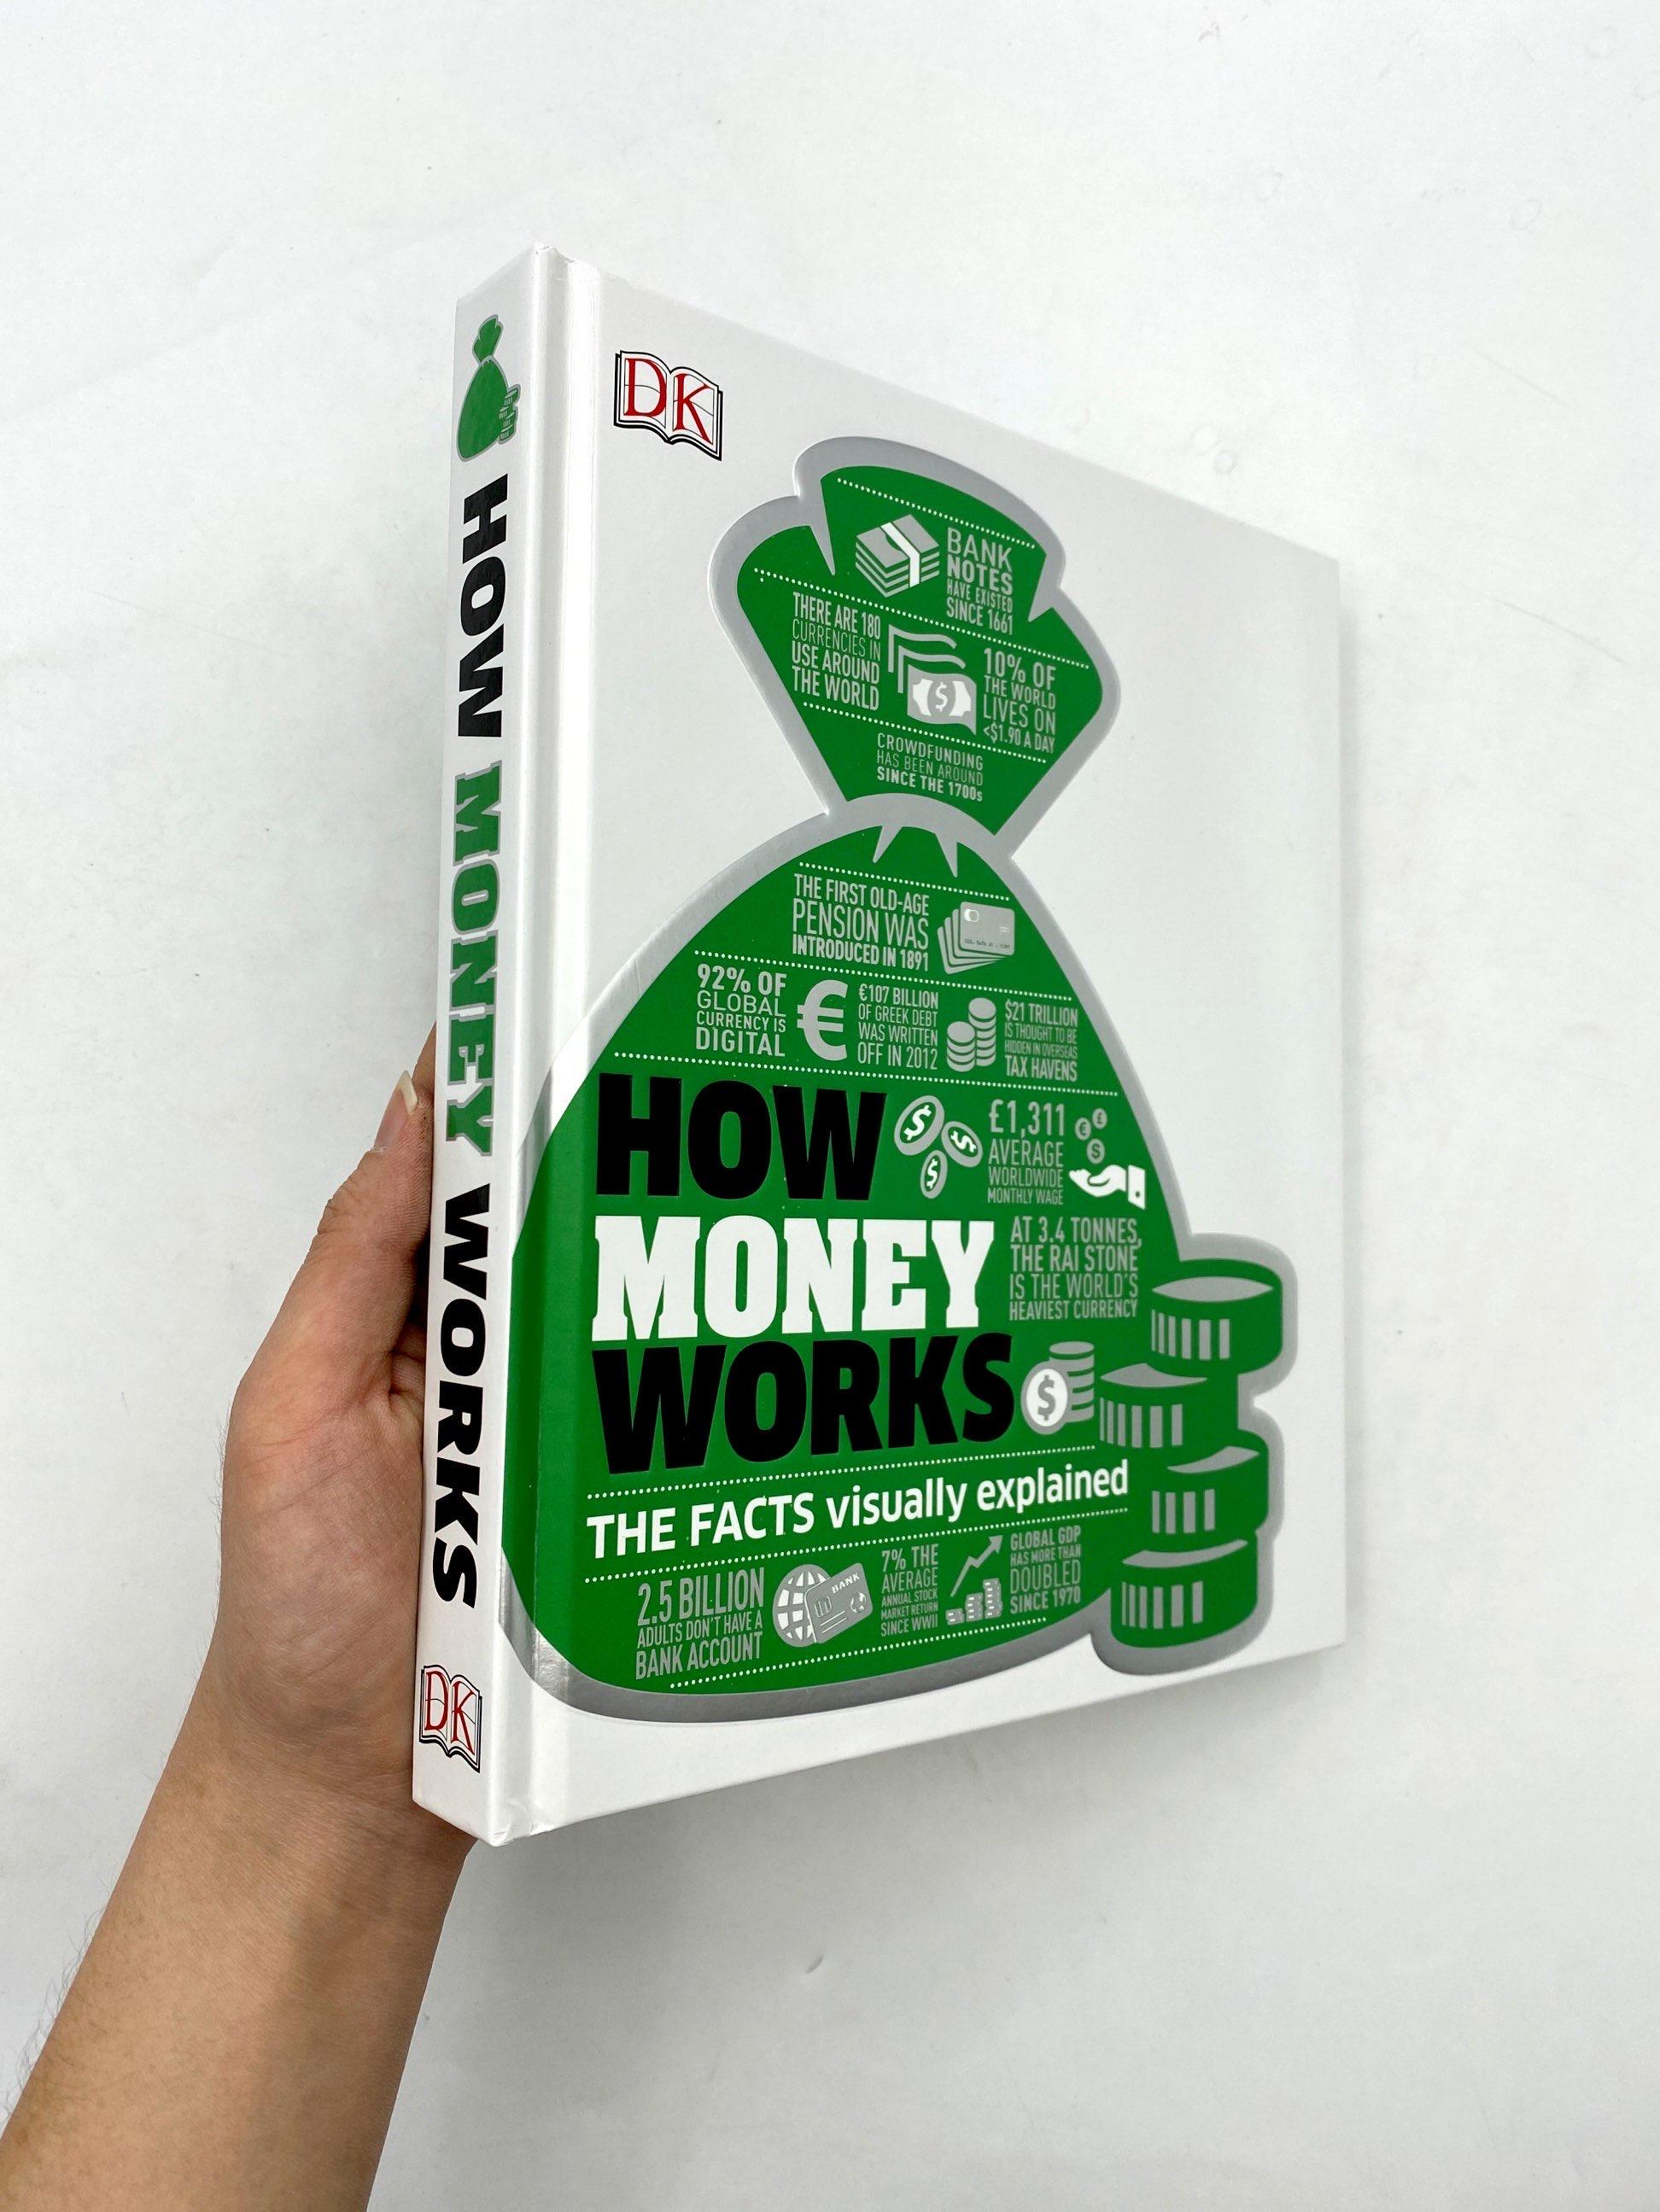 DK The Facts Visually Explained: How Money Works